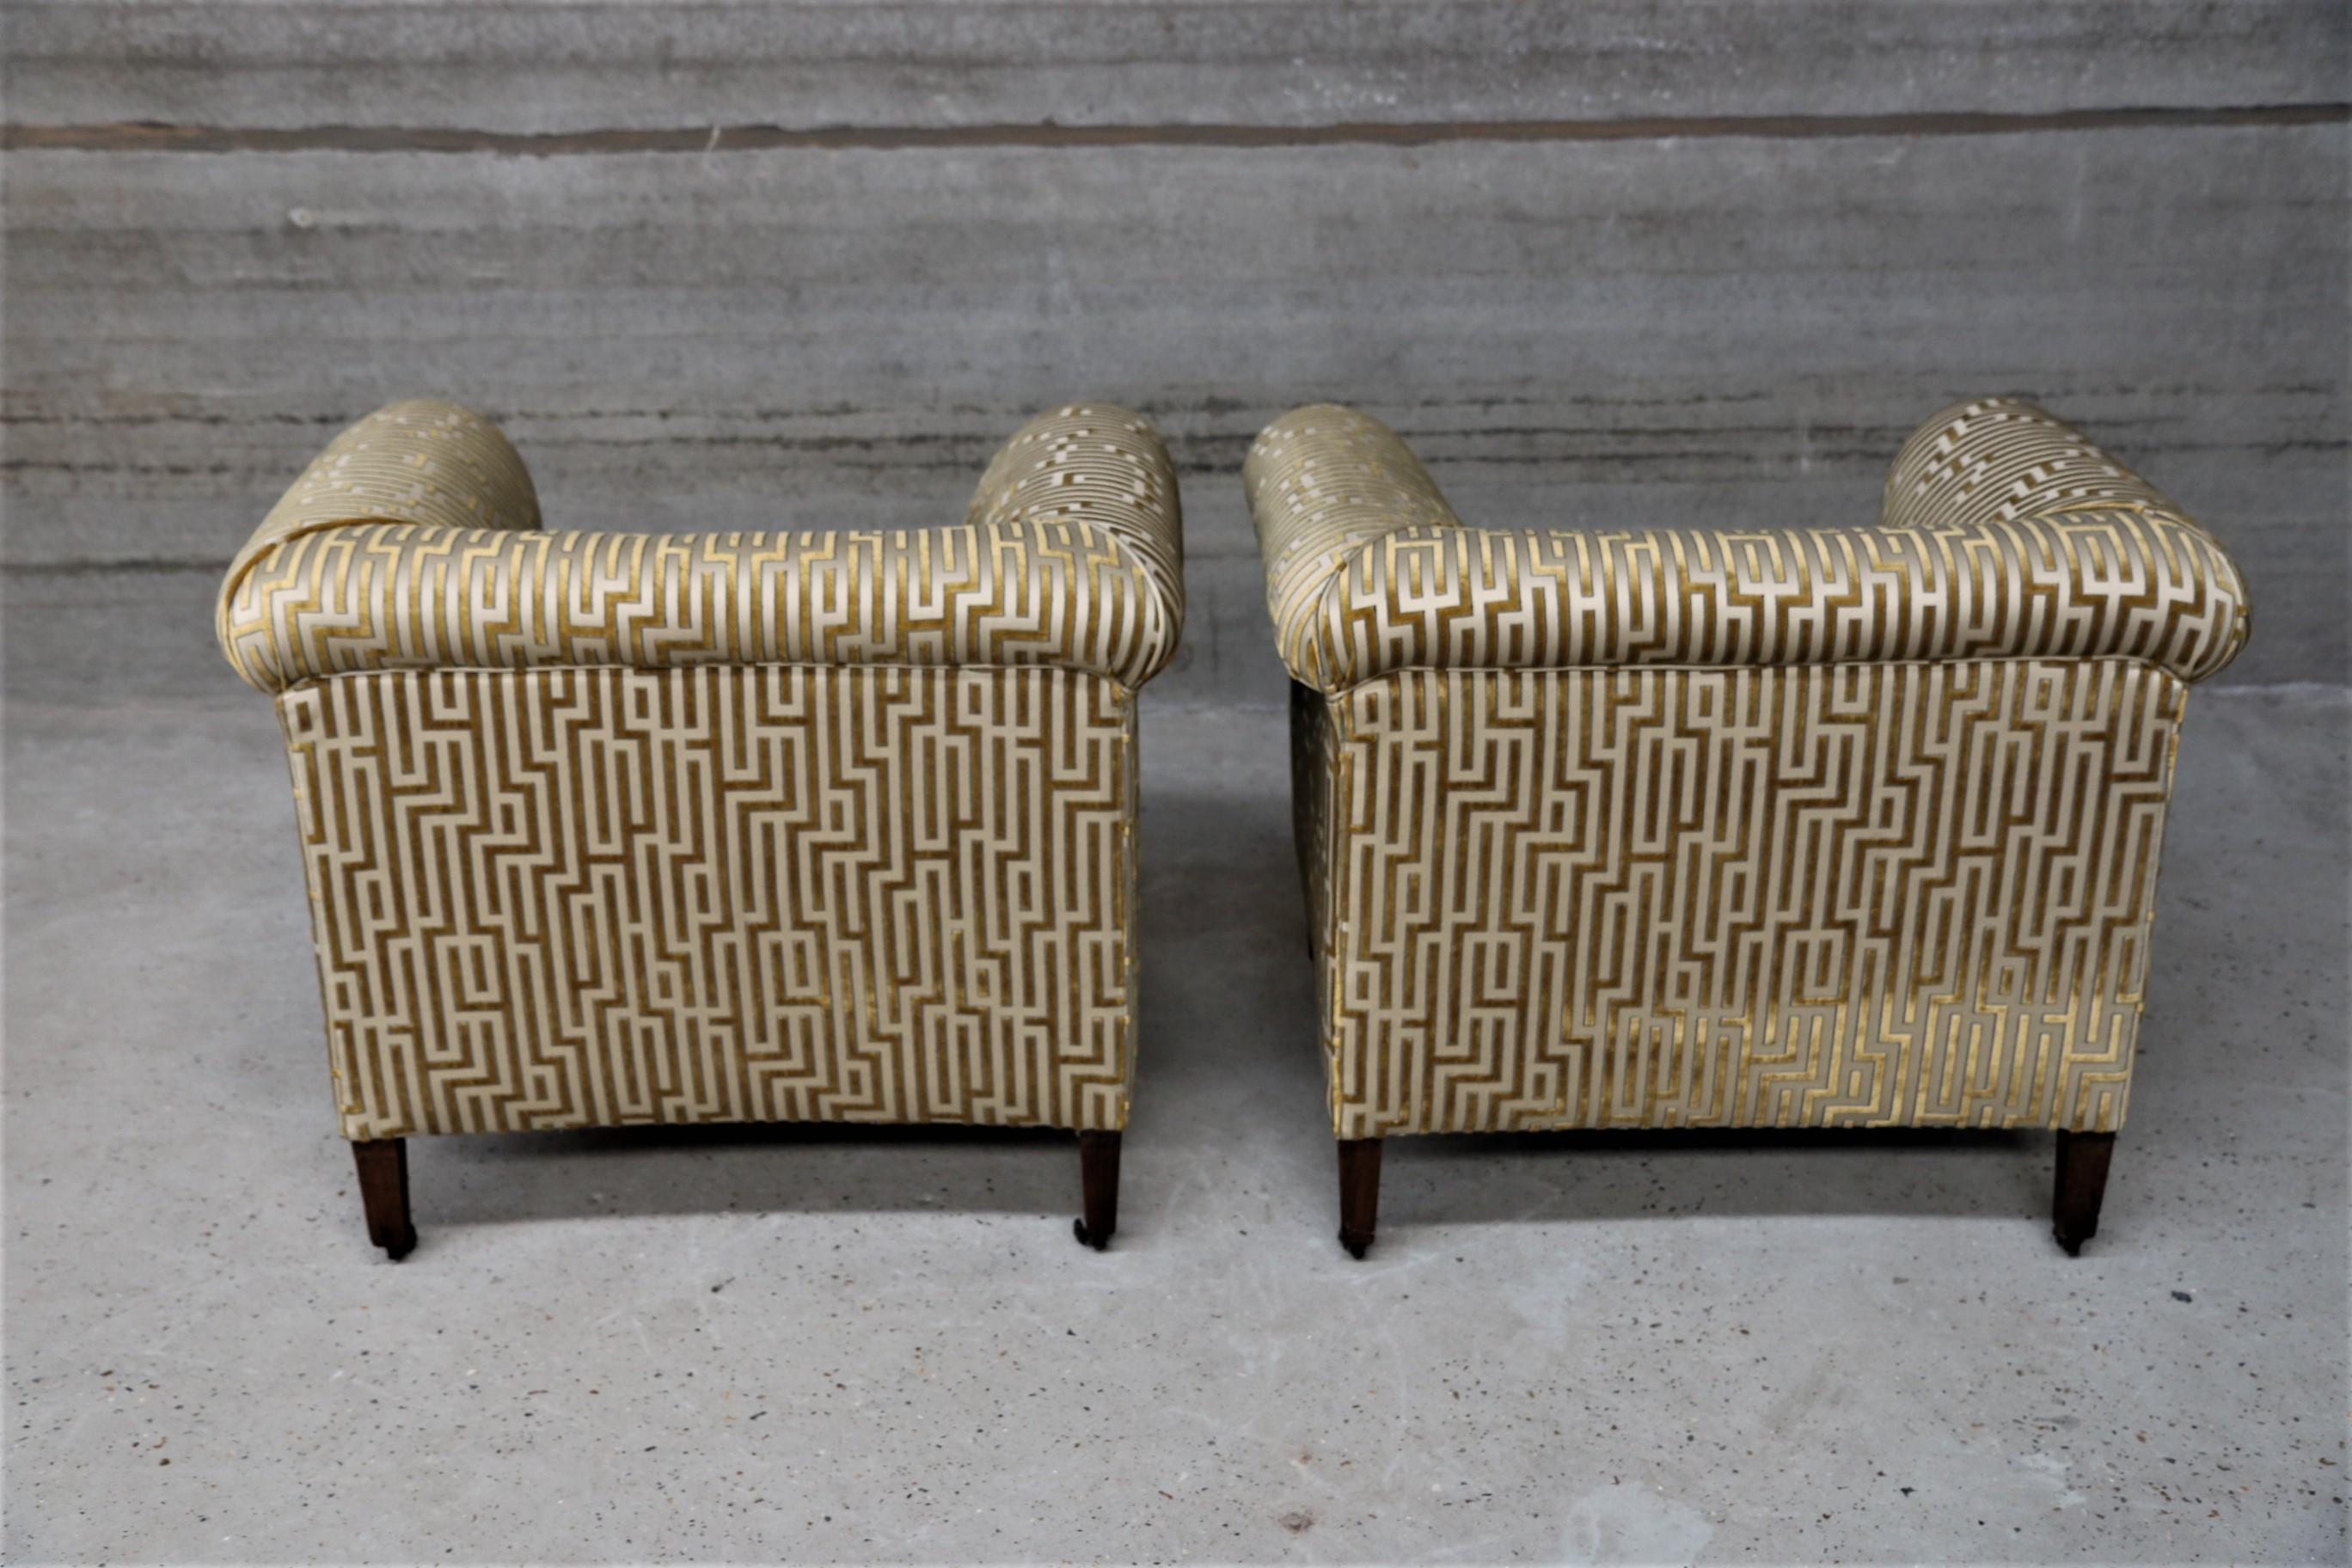 Art Deco Pair of Extra Large Roller Armchairs Re-Upholstered in Fendi Fabric For Sale 4